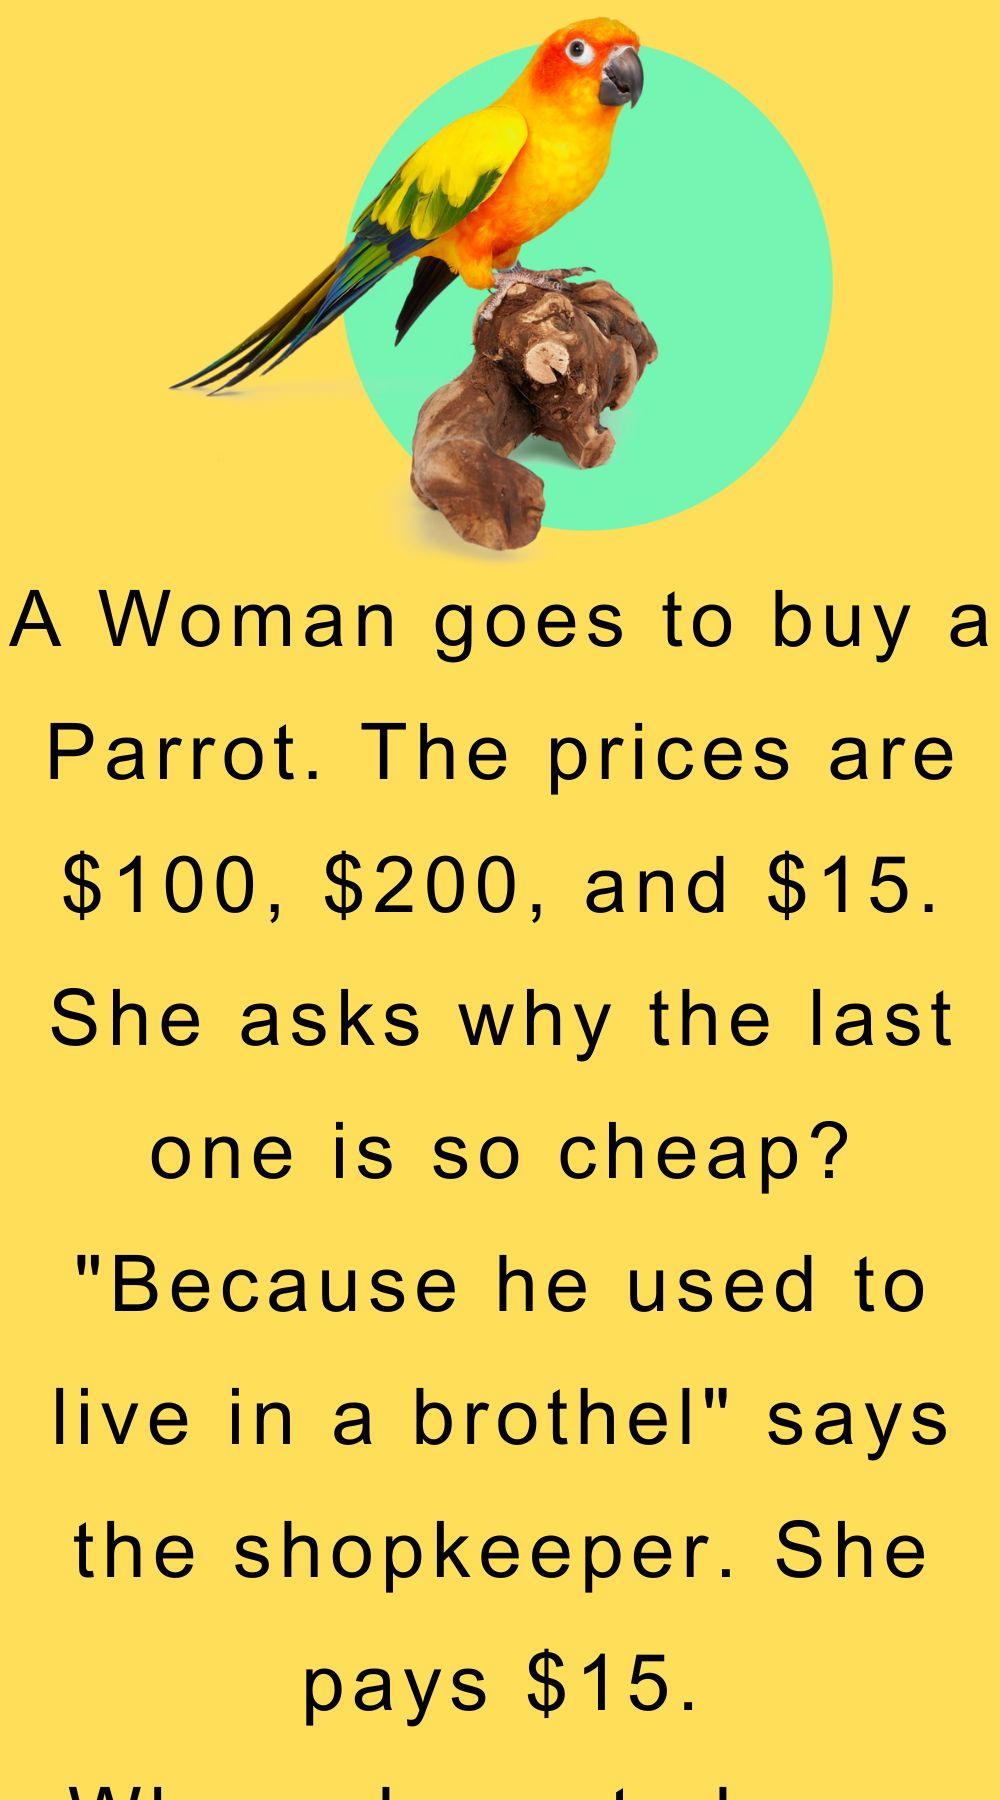 A Woman goes to buy a Parrot